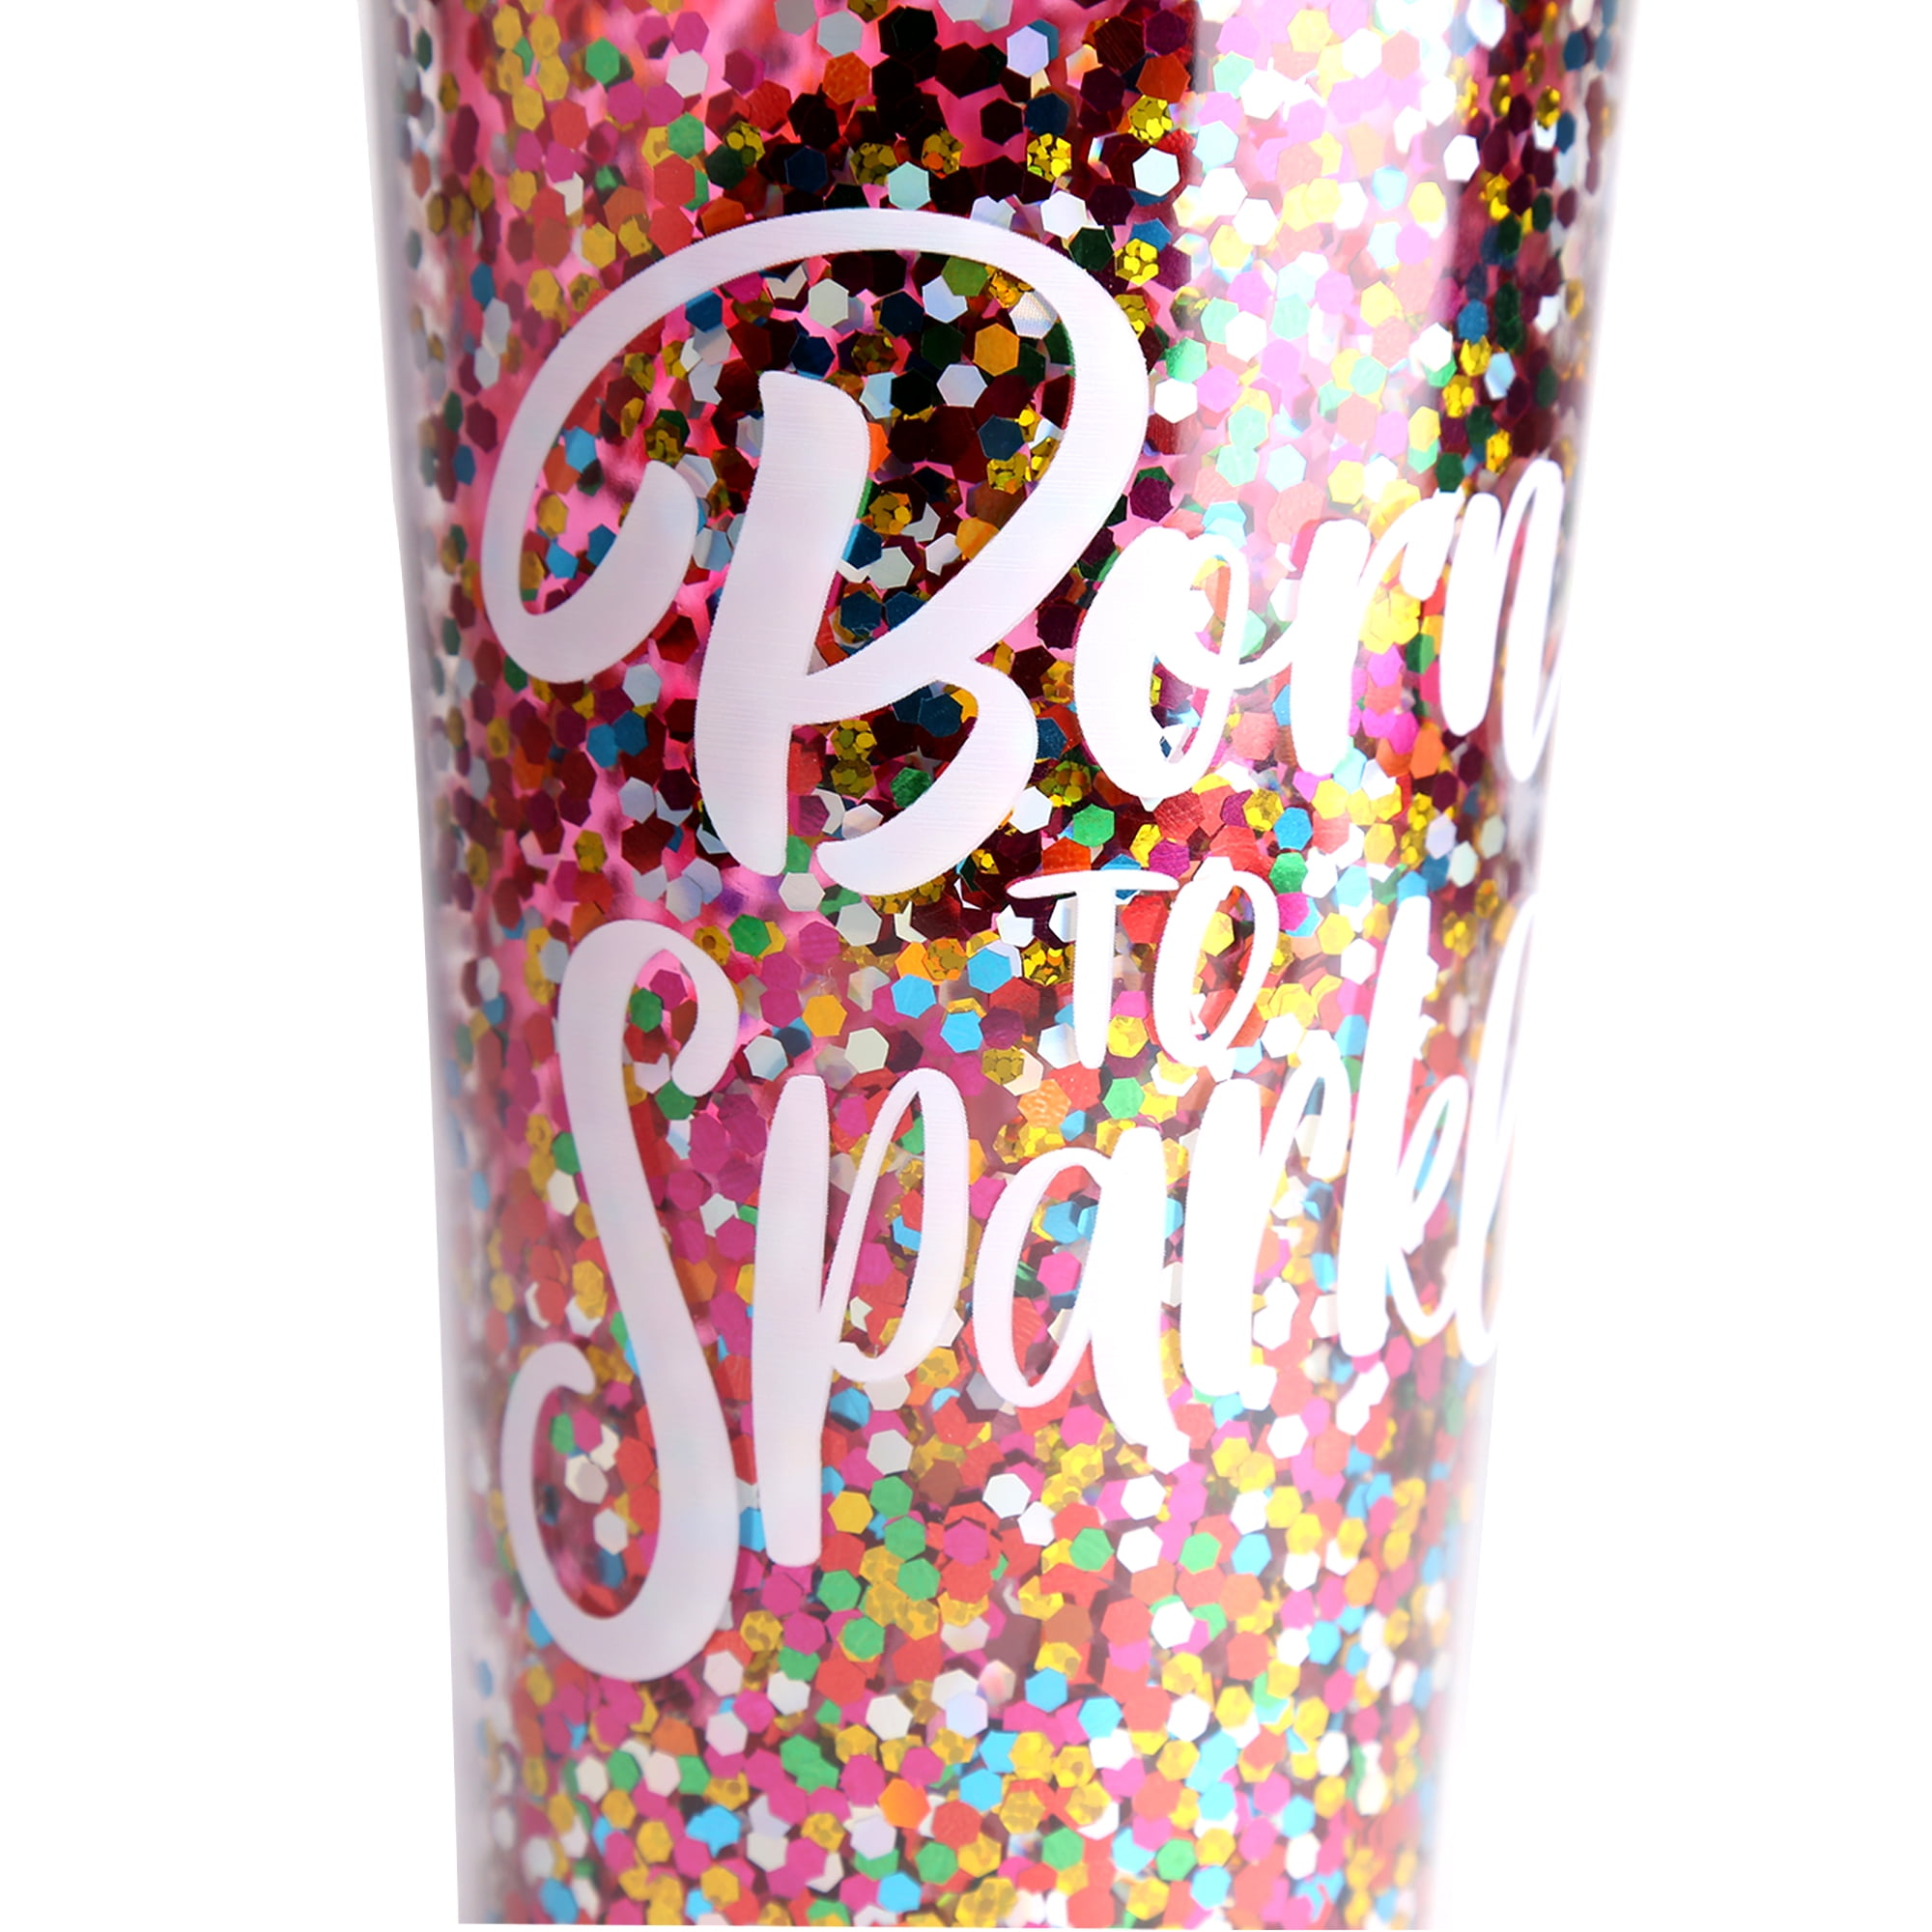 Hard Rock Pop of Color Tumbler with Straw in Pink 24oz